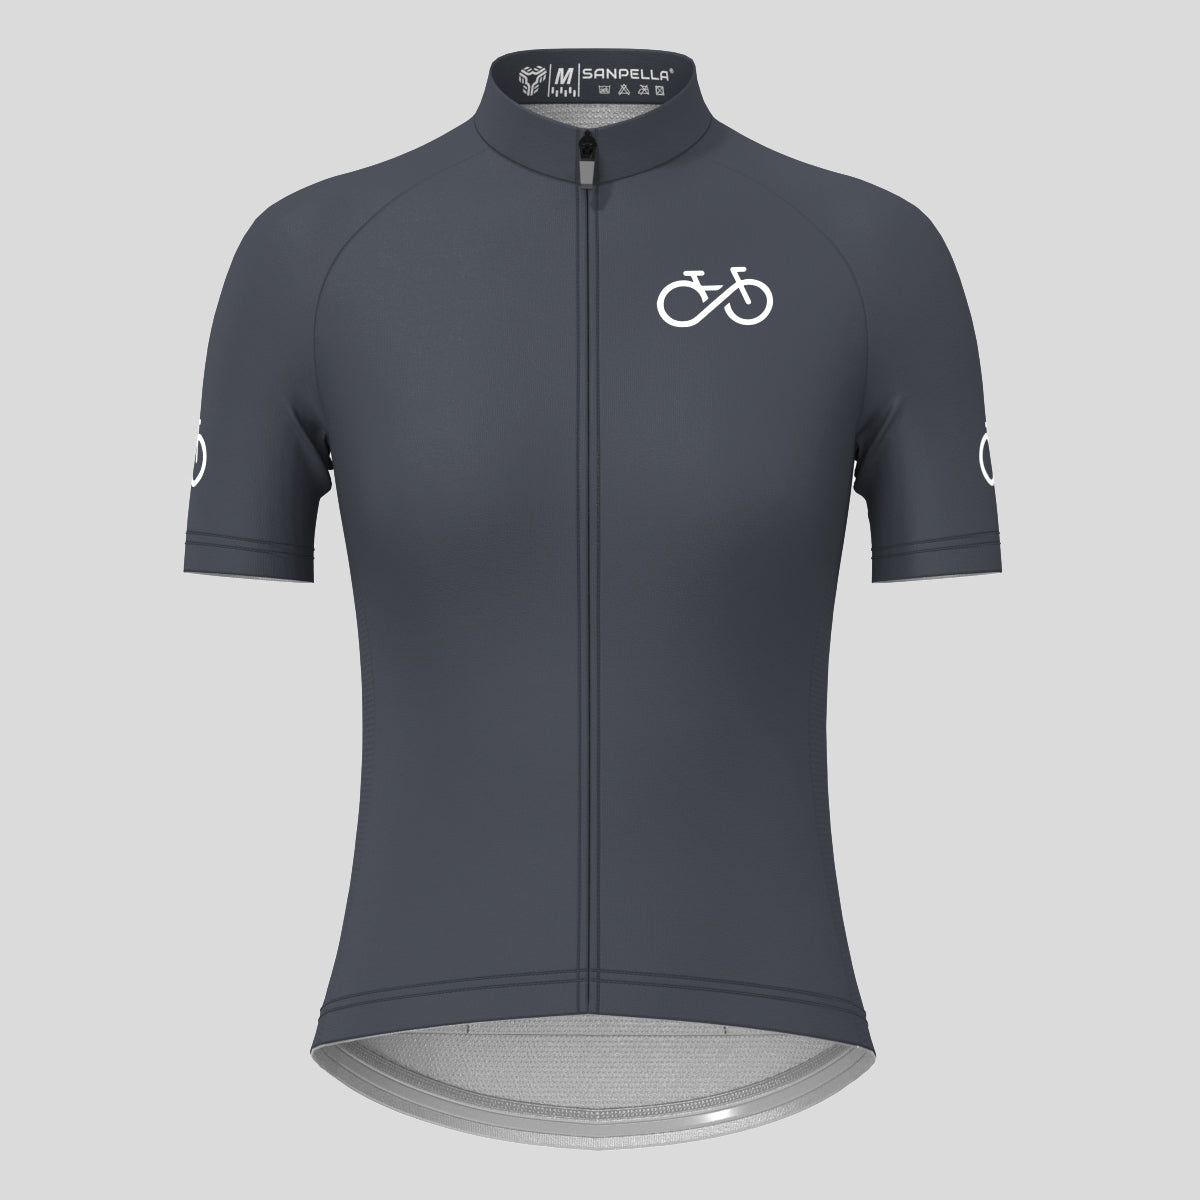 Ride Forever Women's Cycling Jersey - Graphite